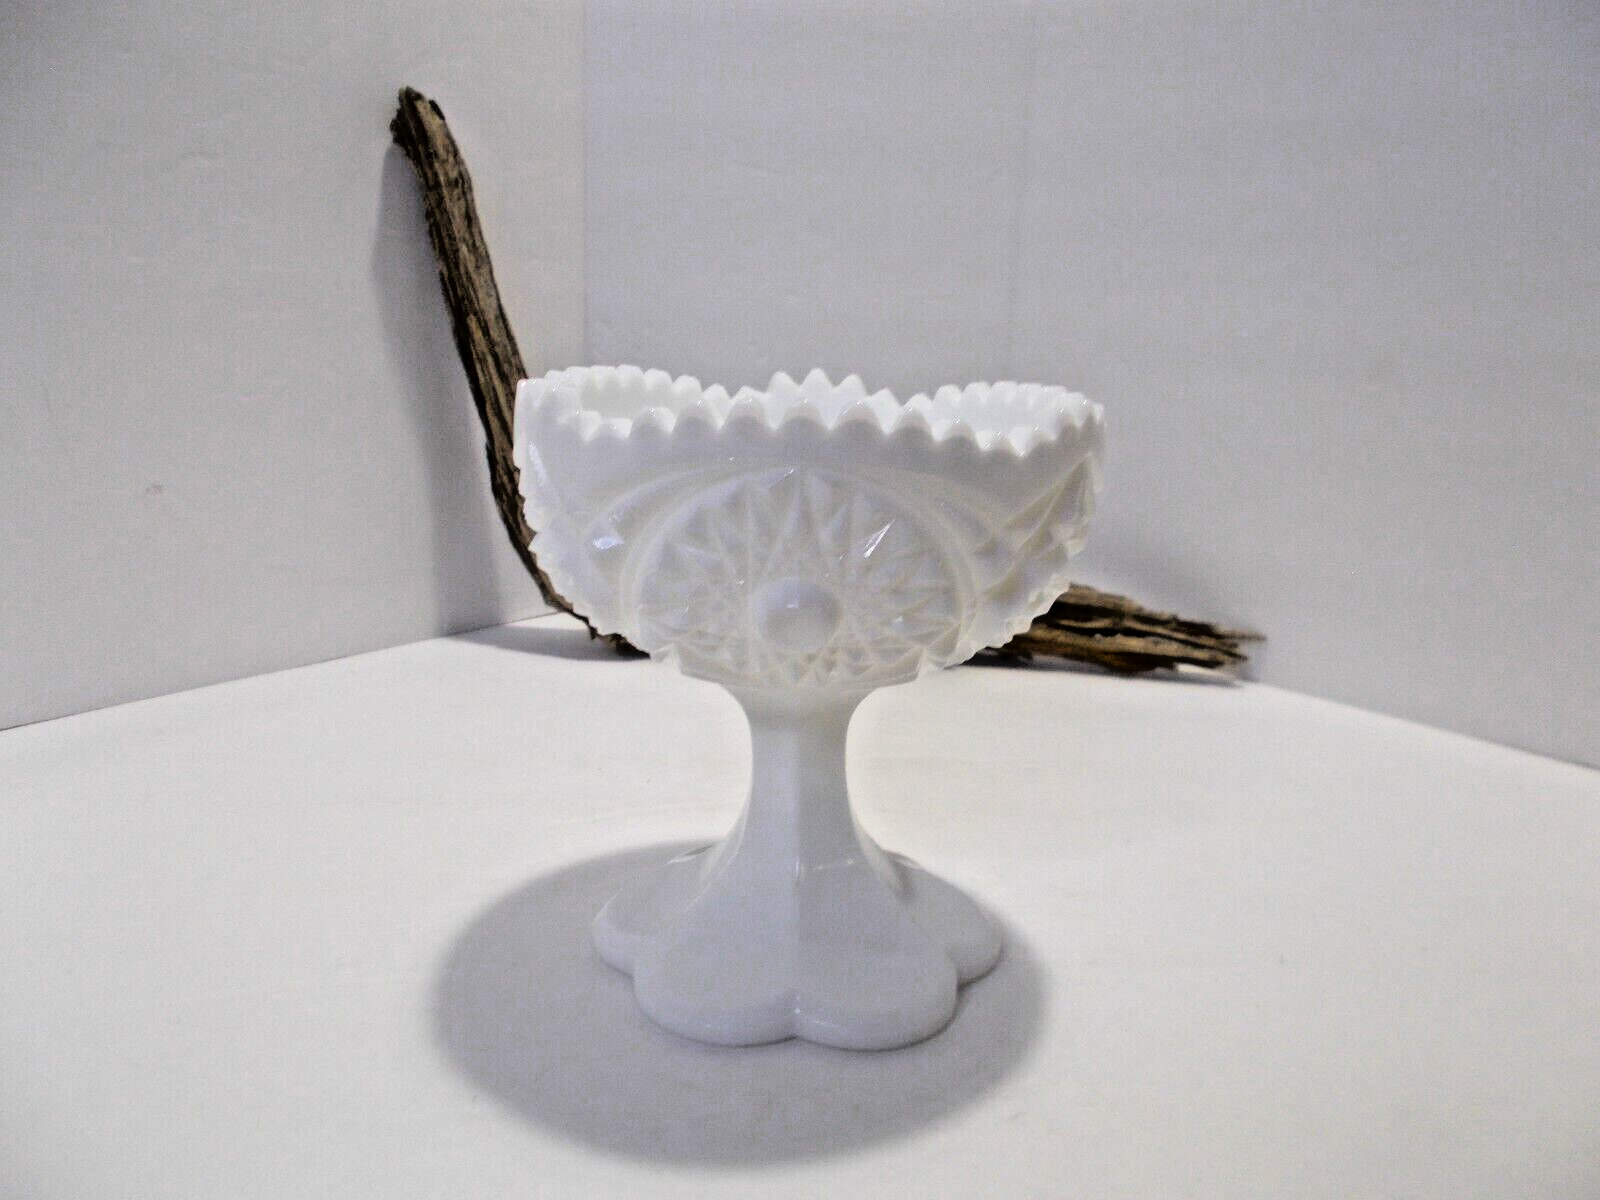 Kemple Milk Glass Hobstar Fan Compote or Candy Nut Dish by Kemple Glass Company